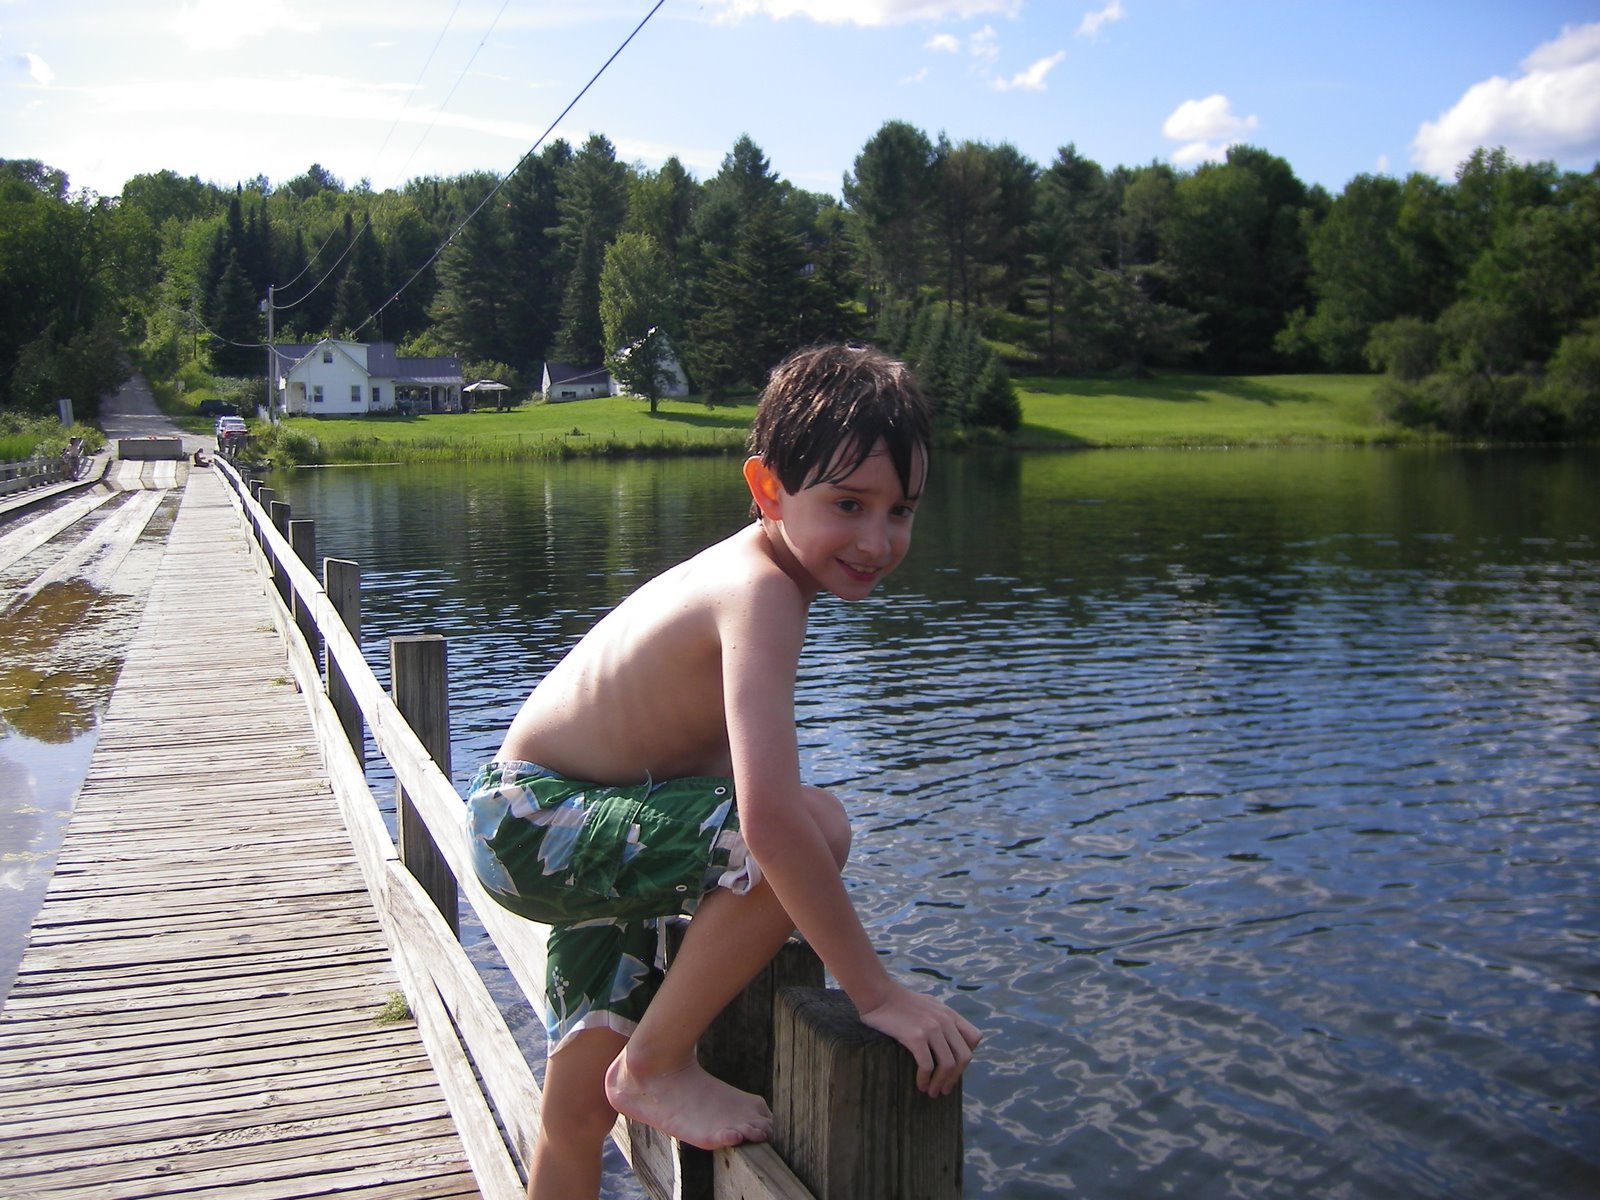 [liam+and+the+pond.JPG]